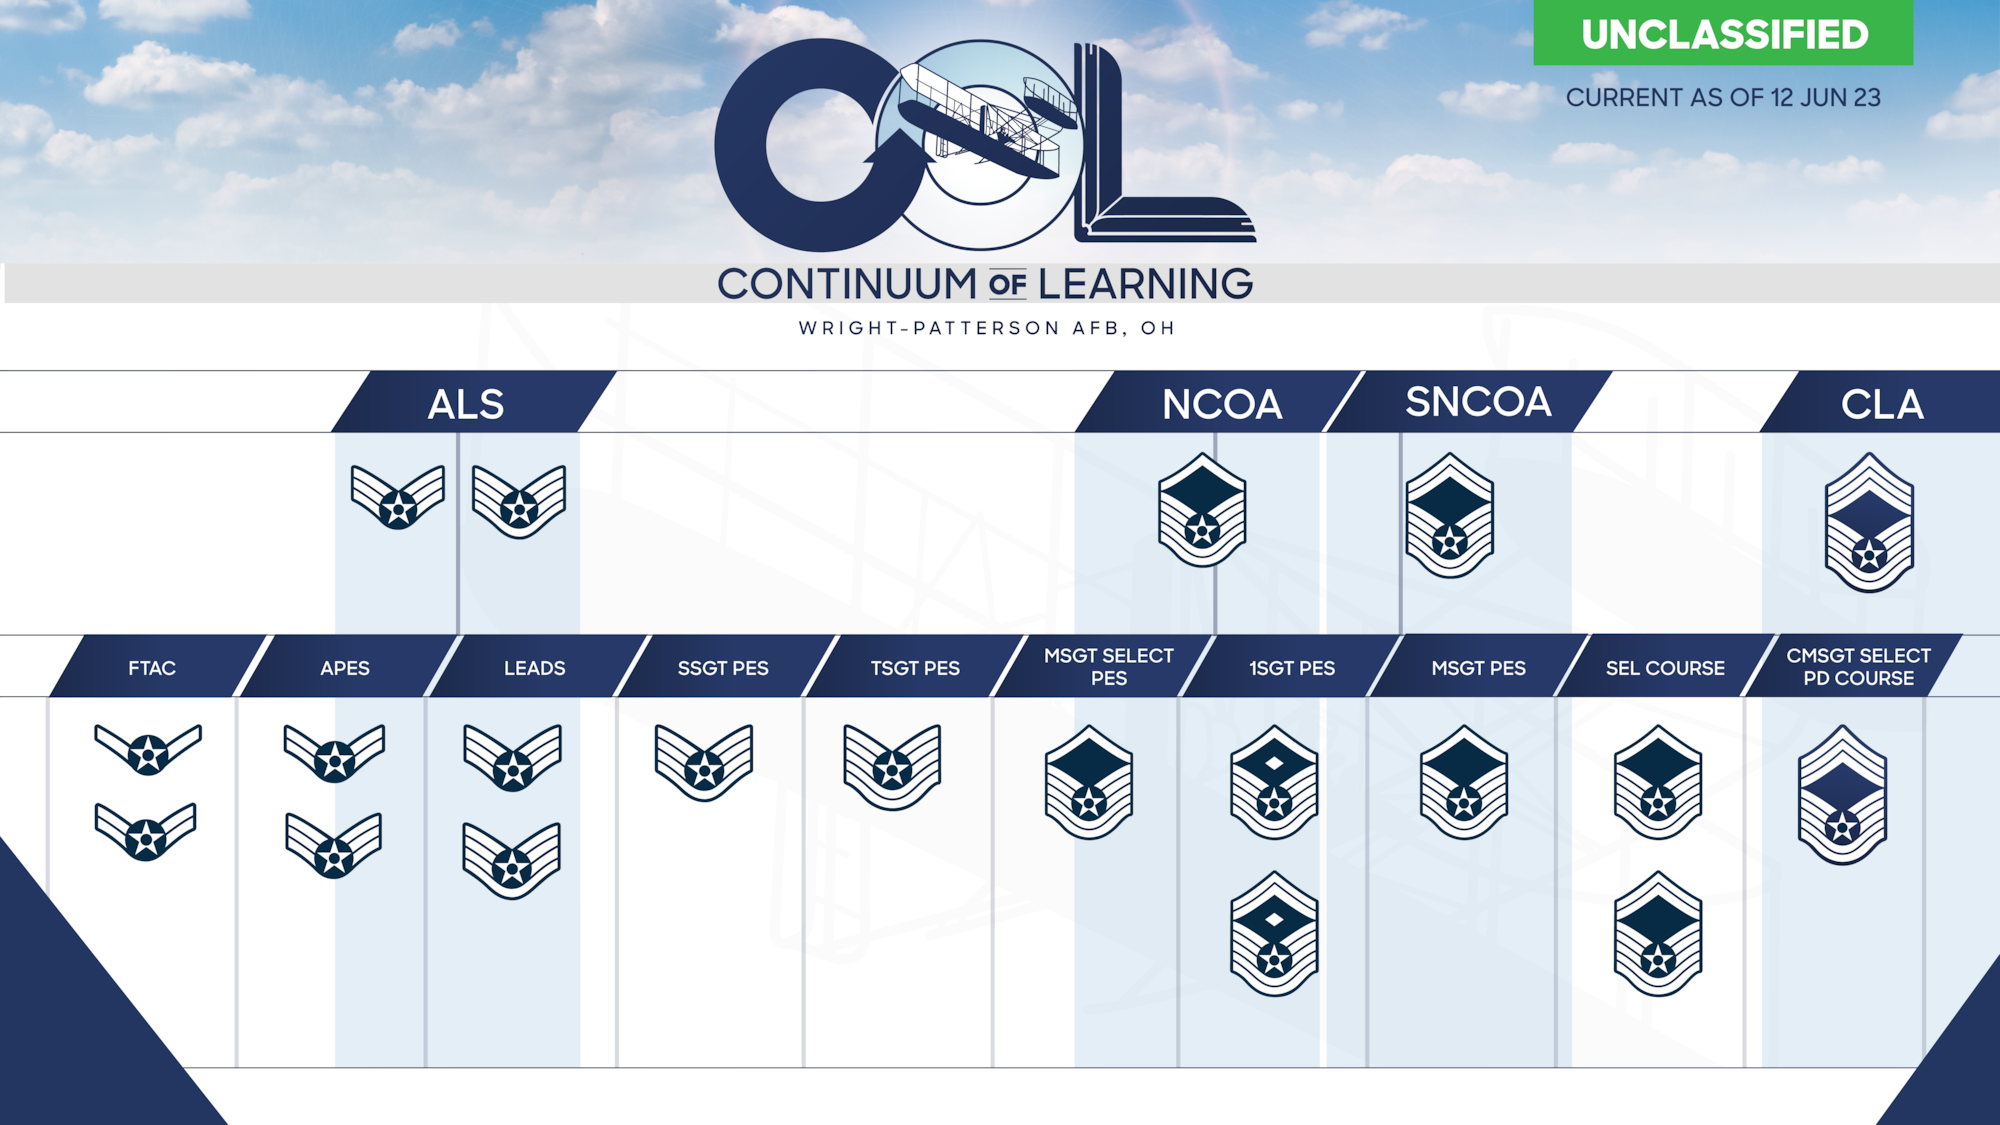 WPAFB Continuum of Learning